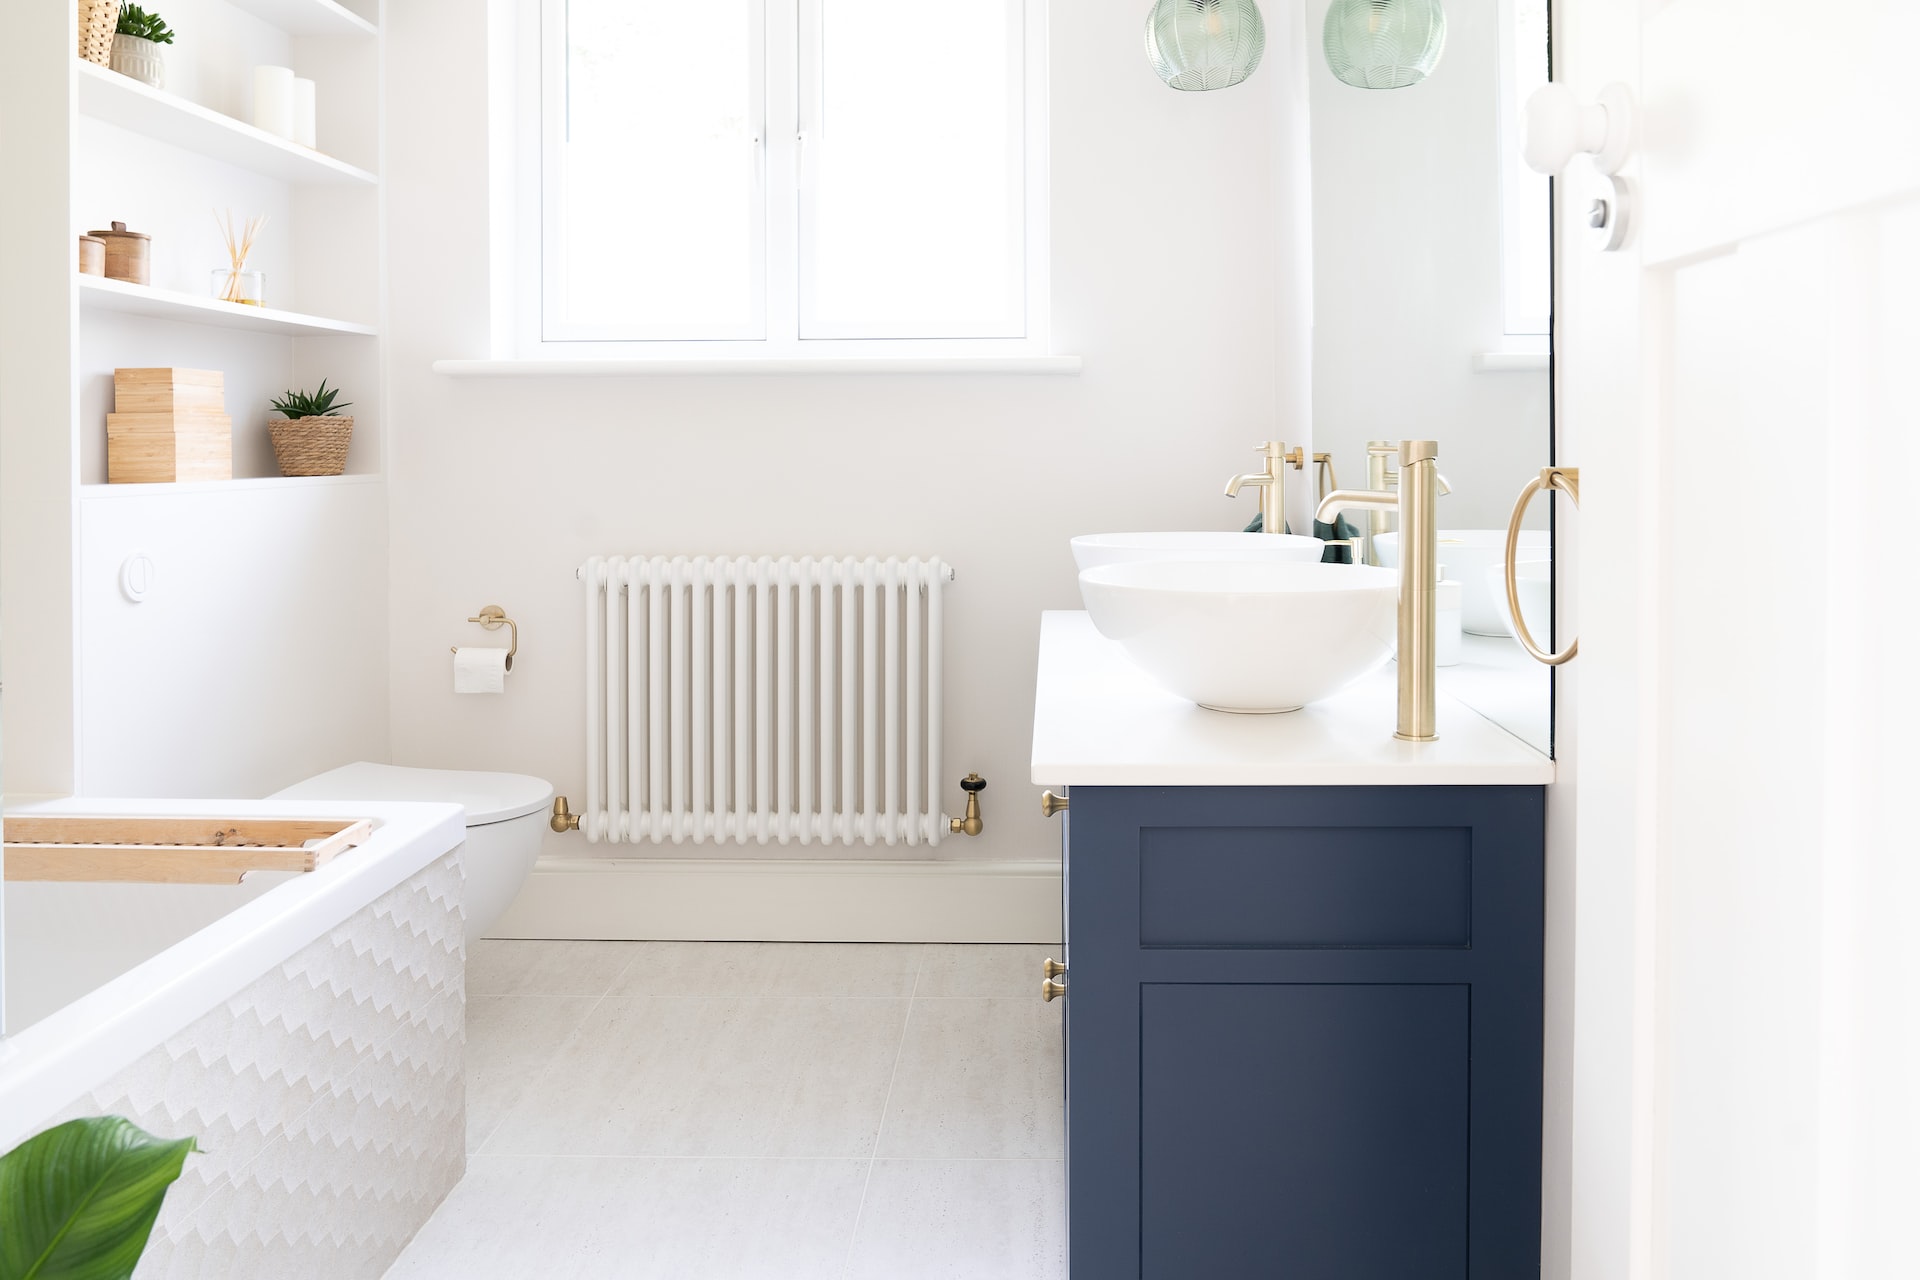 7 Simple Steps To Declutter Your Bathroom